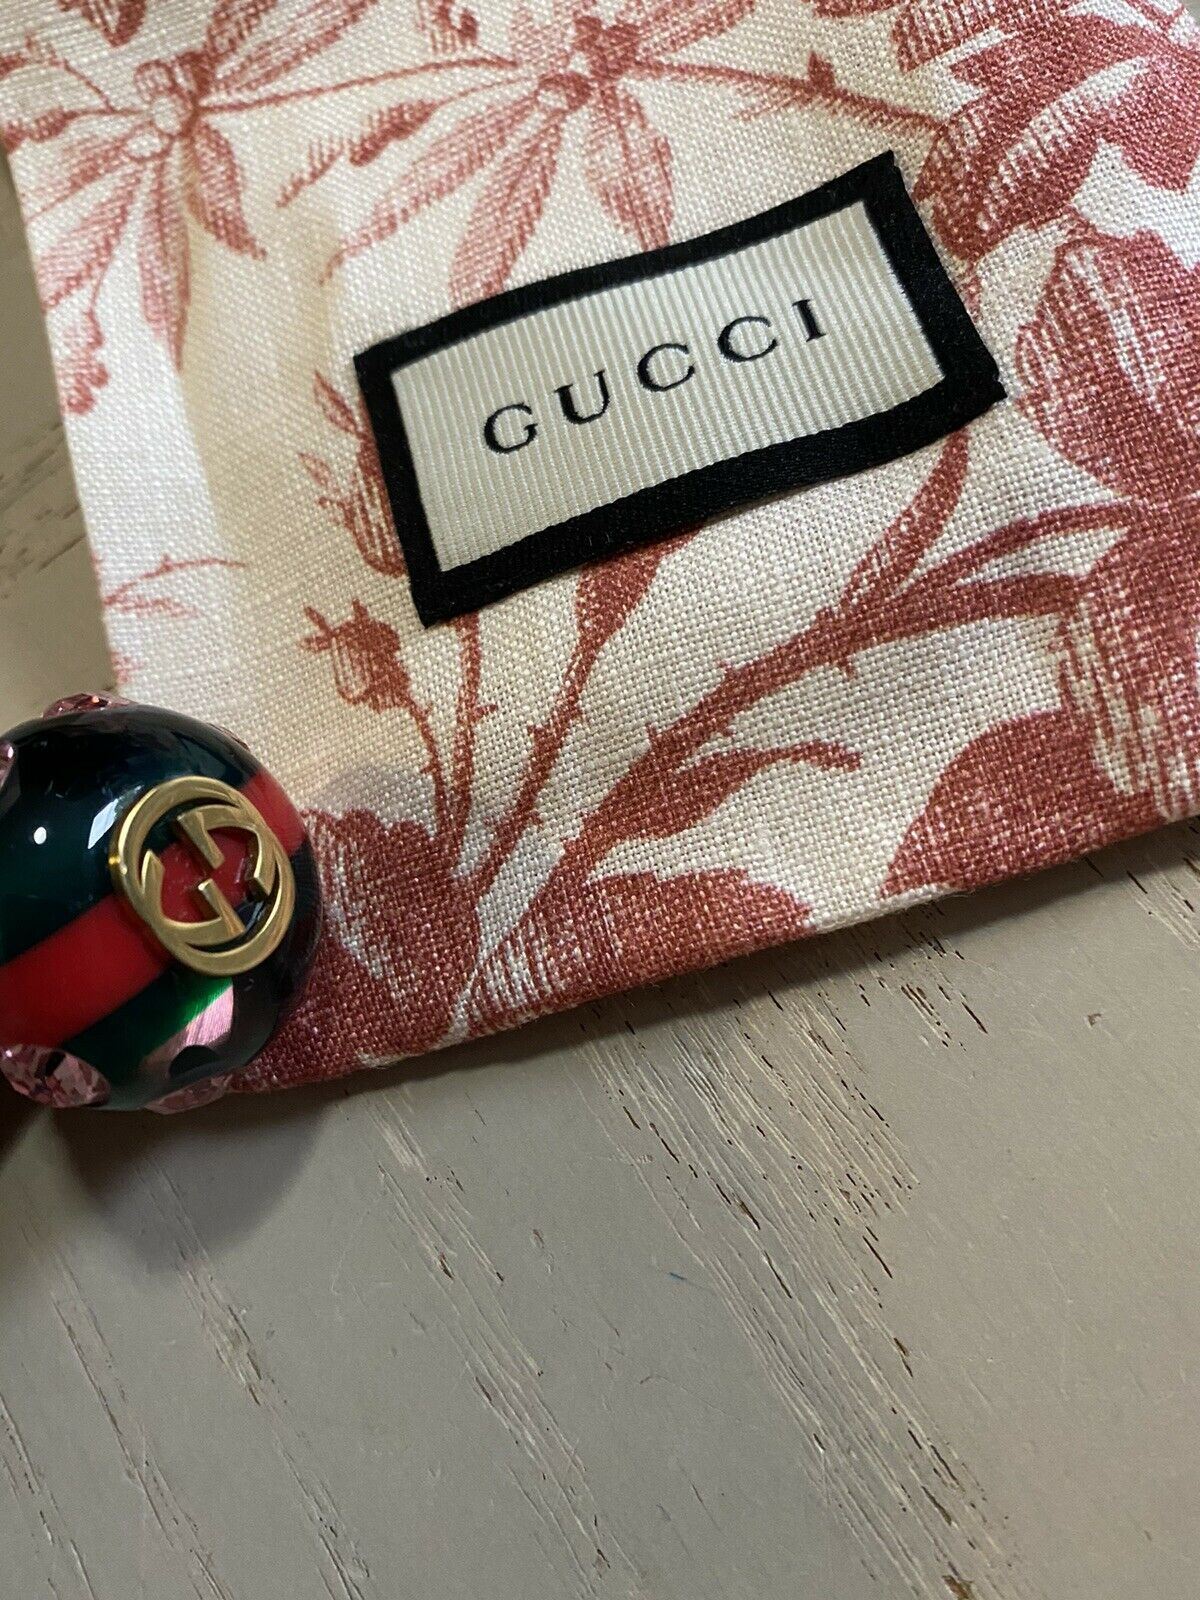 New Authentic GUCCI Sylvie Women Vintage Web GG Ring Size S Italy